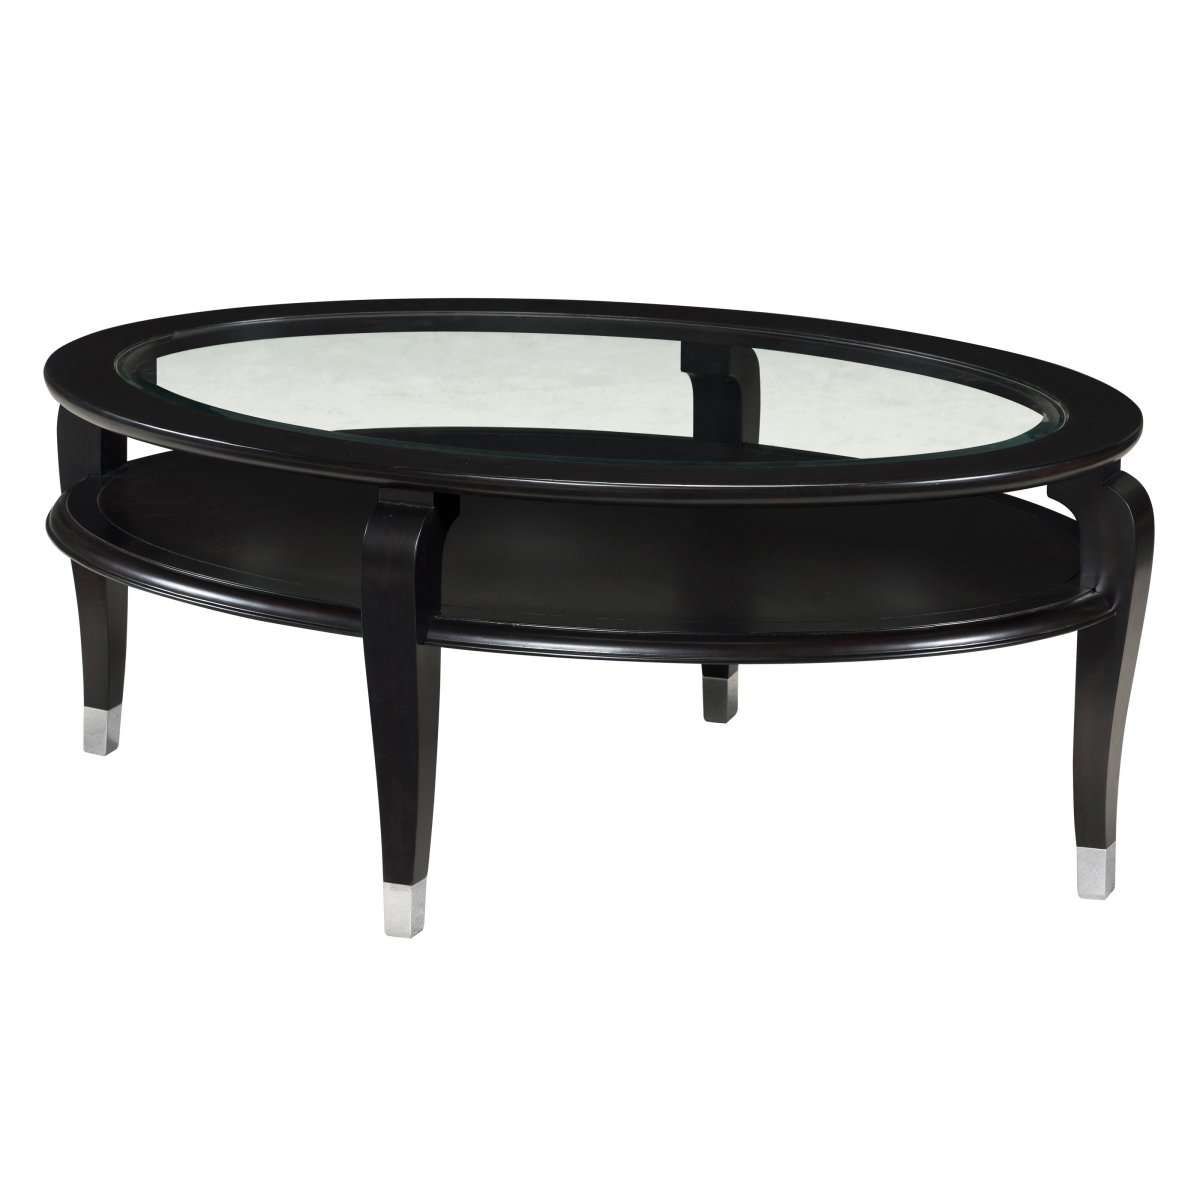 Well Liked Oval Shaped Glass Coffee Tables Throughout Coffee Tables Ideas: Awesome Black Oval Coffee Table Set Oval Wood (View 7 of 20)